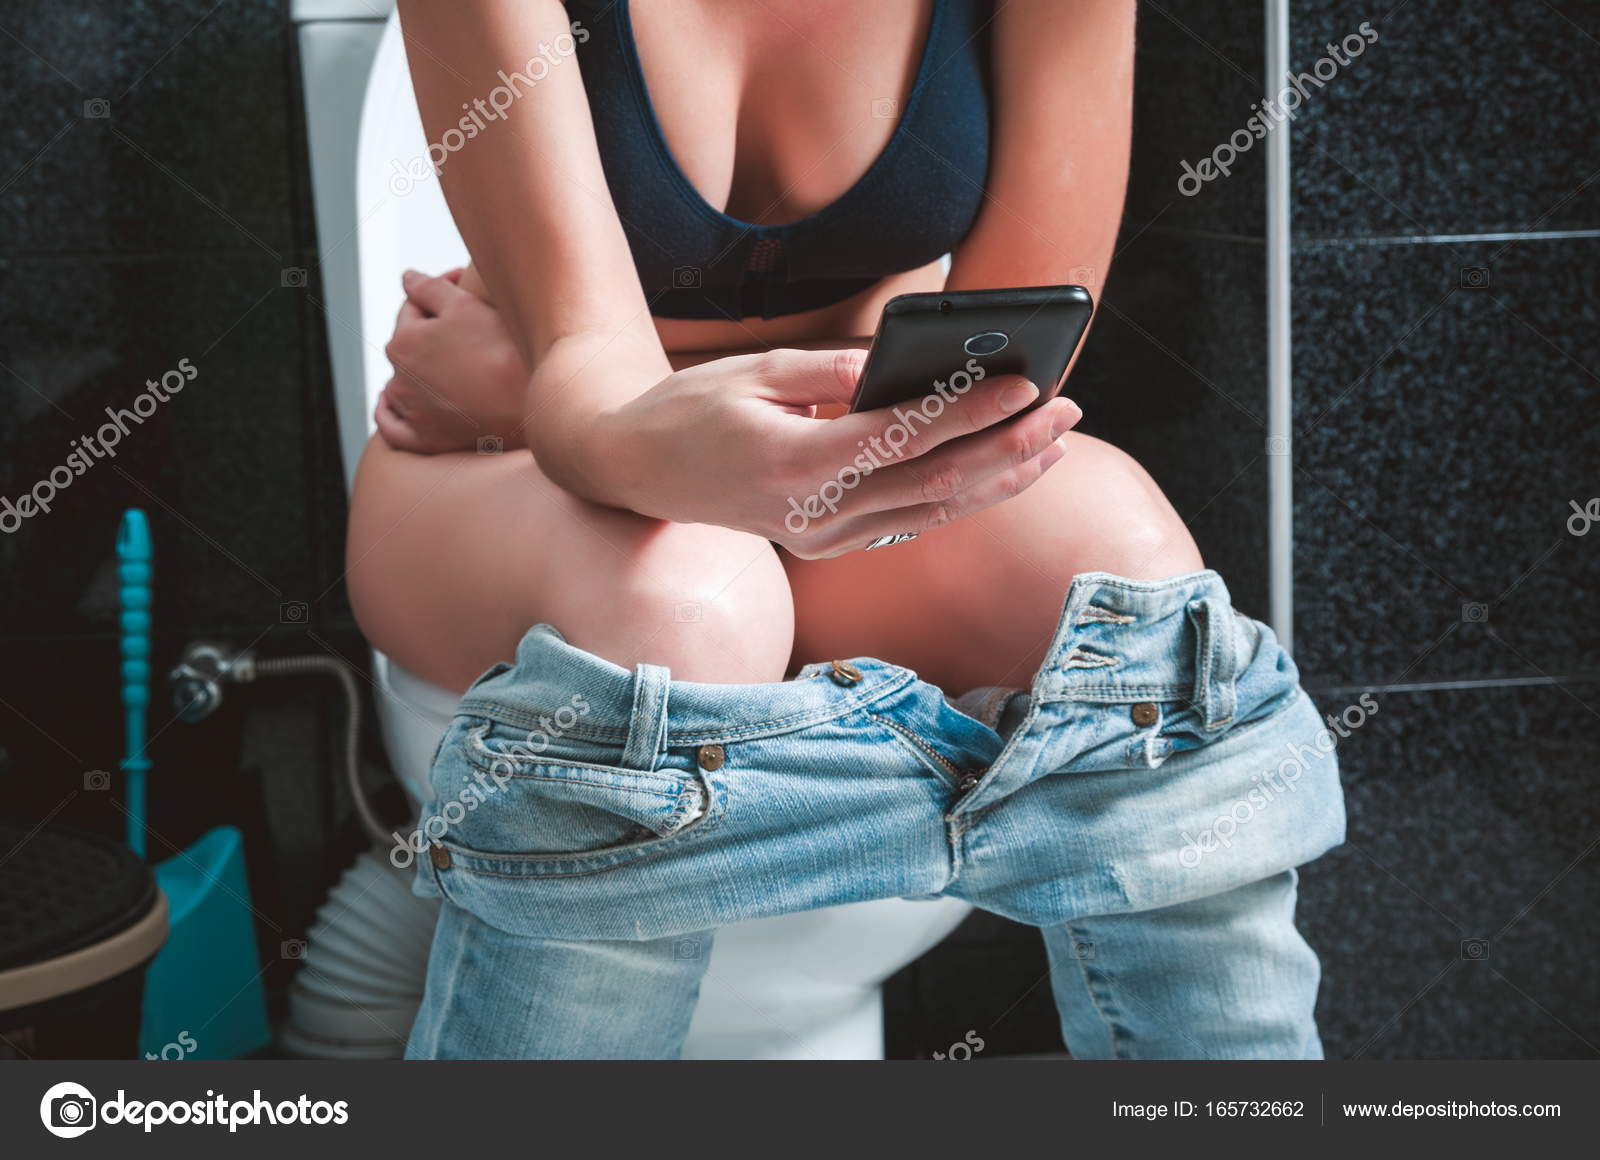 Girl Peeing Pictures